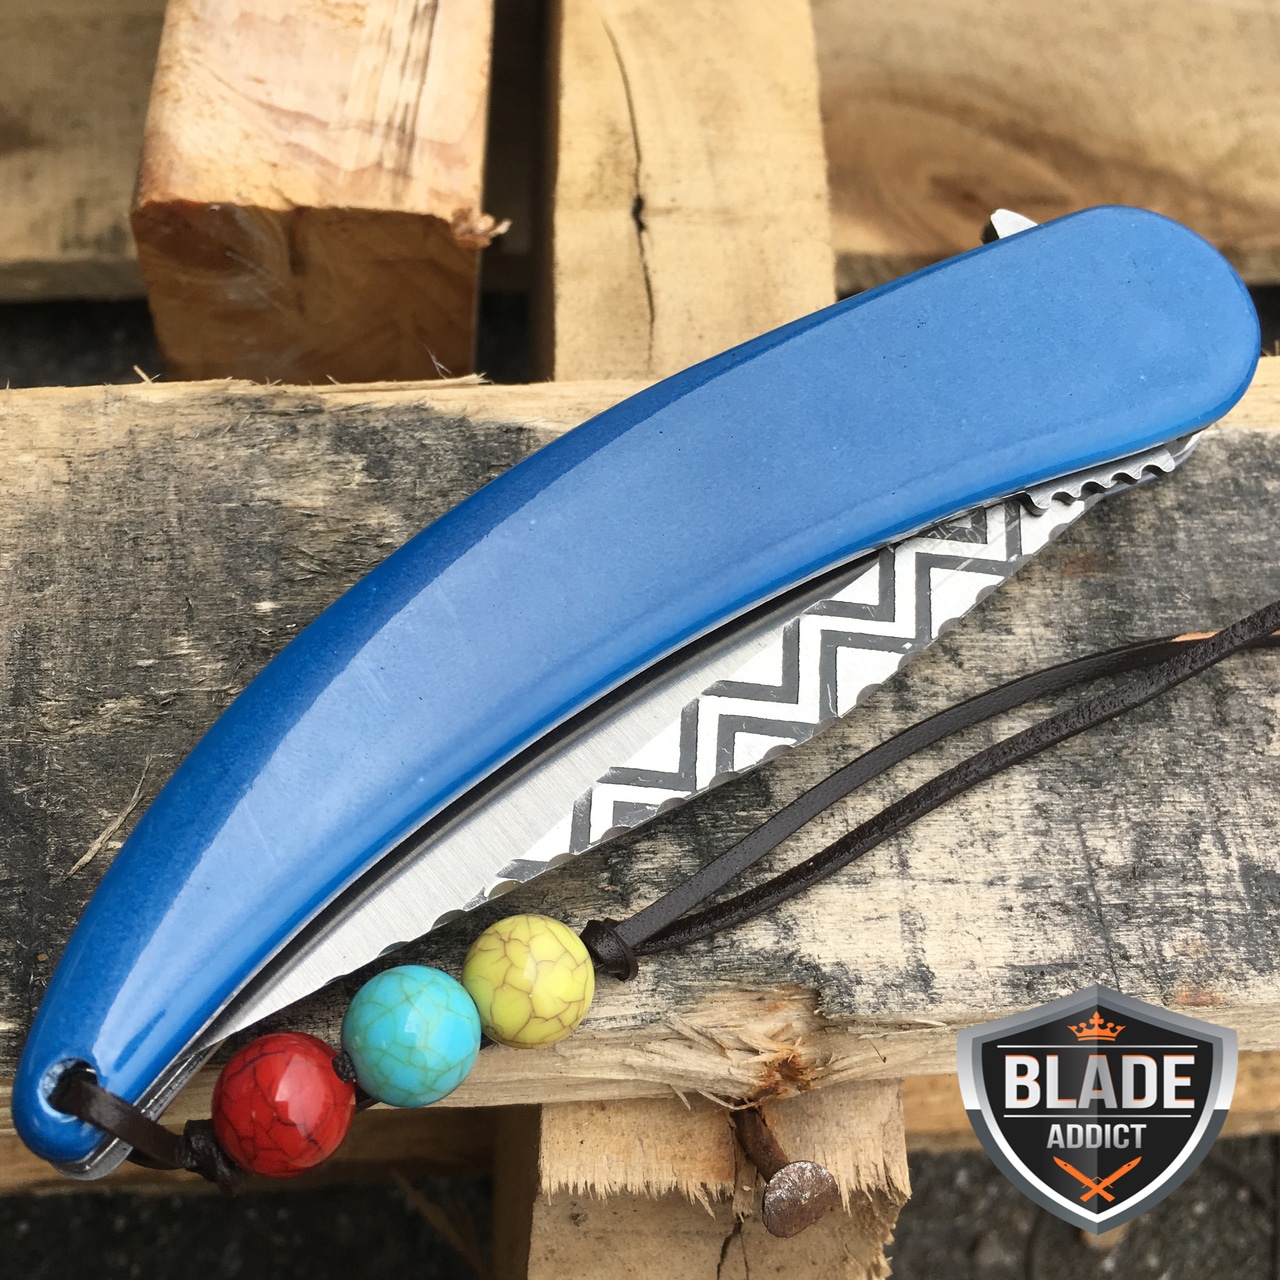 8.5" Native American Indian Spring Assisted Open Folding Pocket Knife BLUE EDC